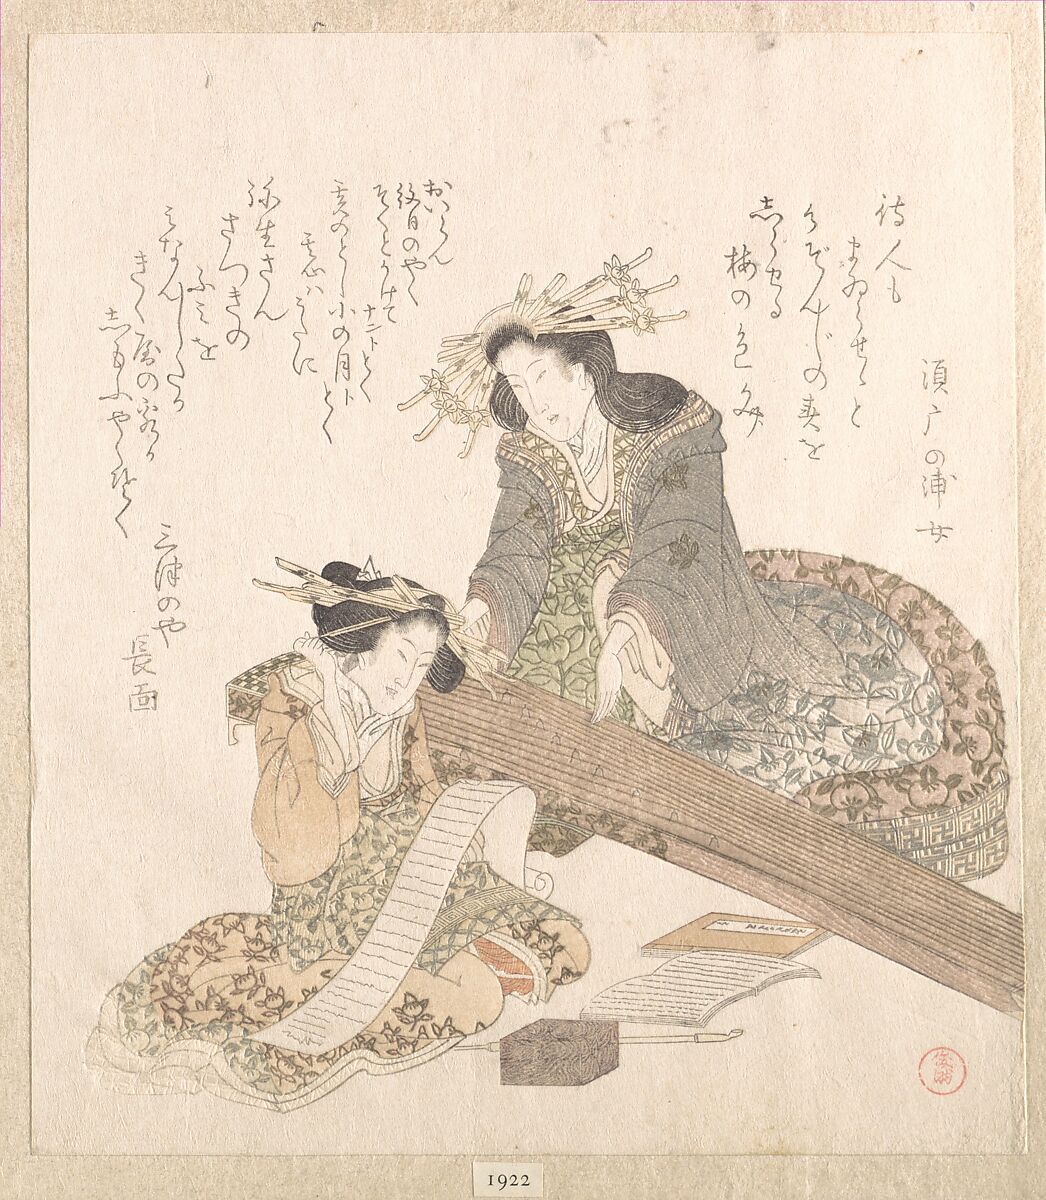 Two Courtesans, One Playing a Koto (Harp) and The Other Reading a Letter, Kubo Shunman (Japanese, 1757–1820), Woodblock print (surimono); ink and color on paper, Japan 